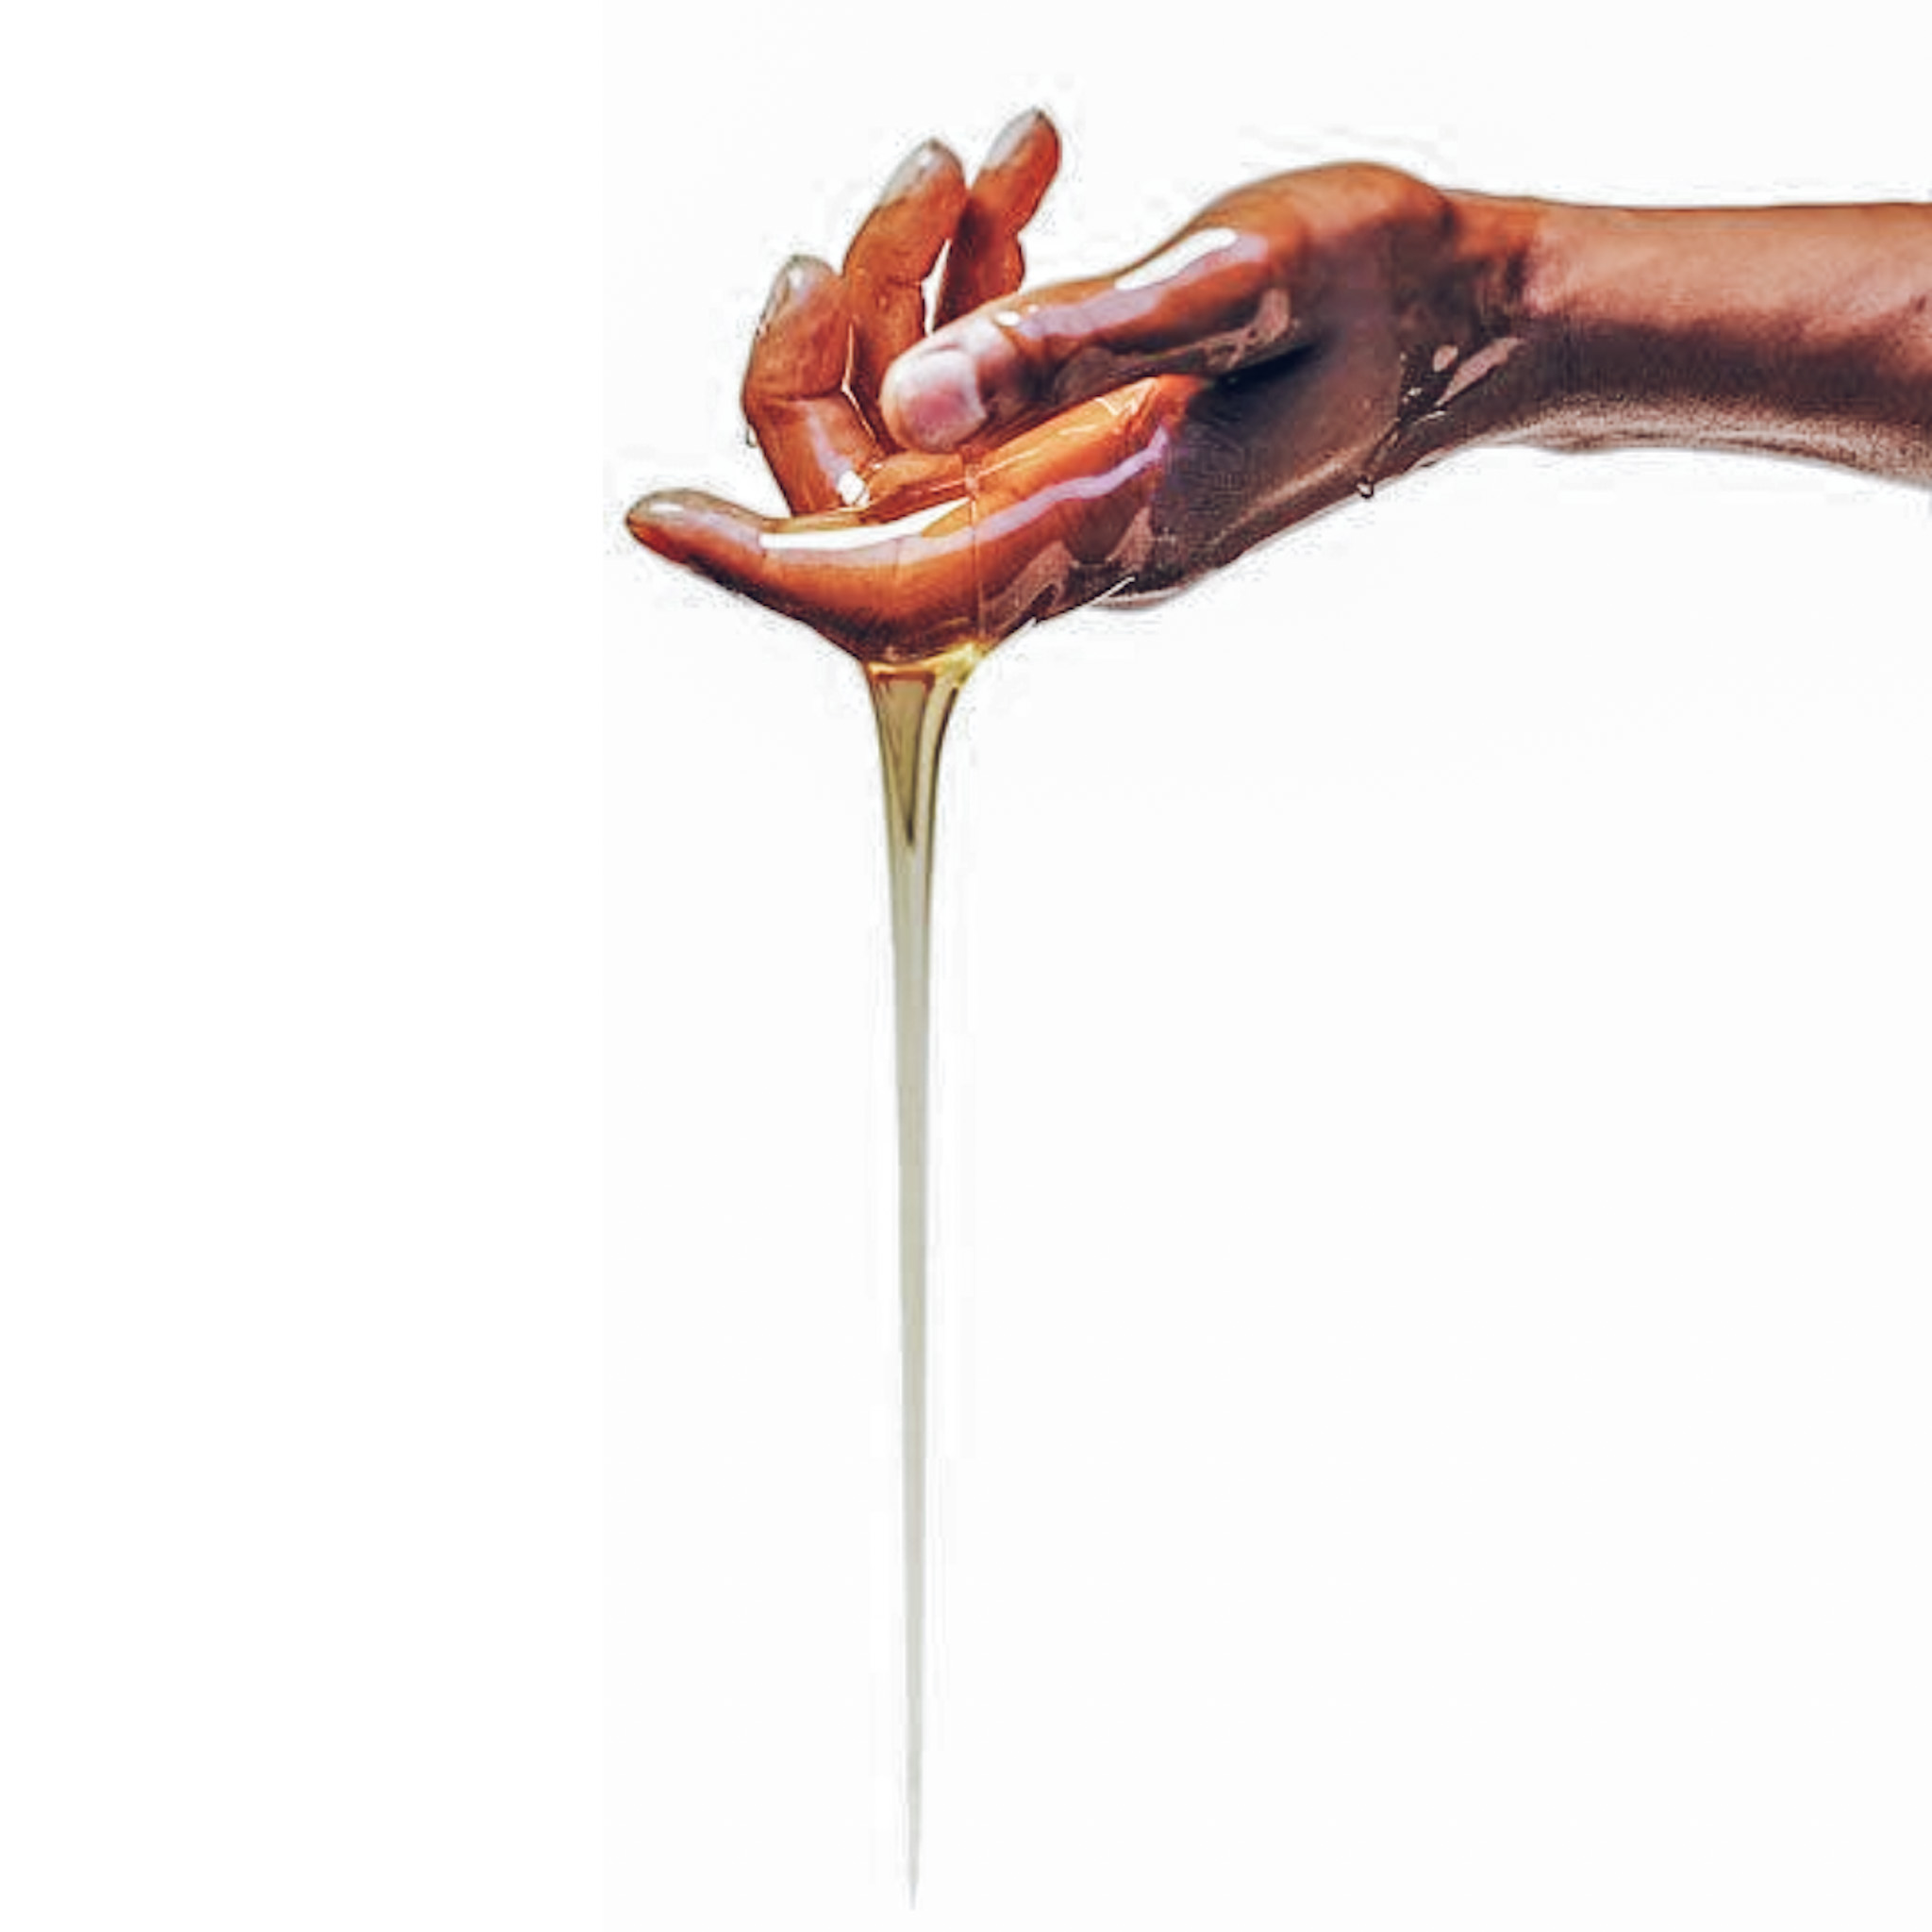 honey dripping from hand